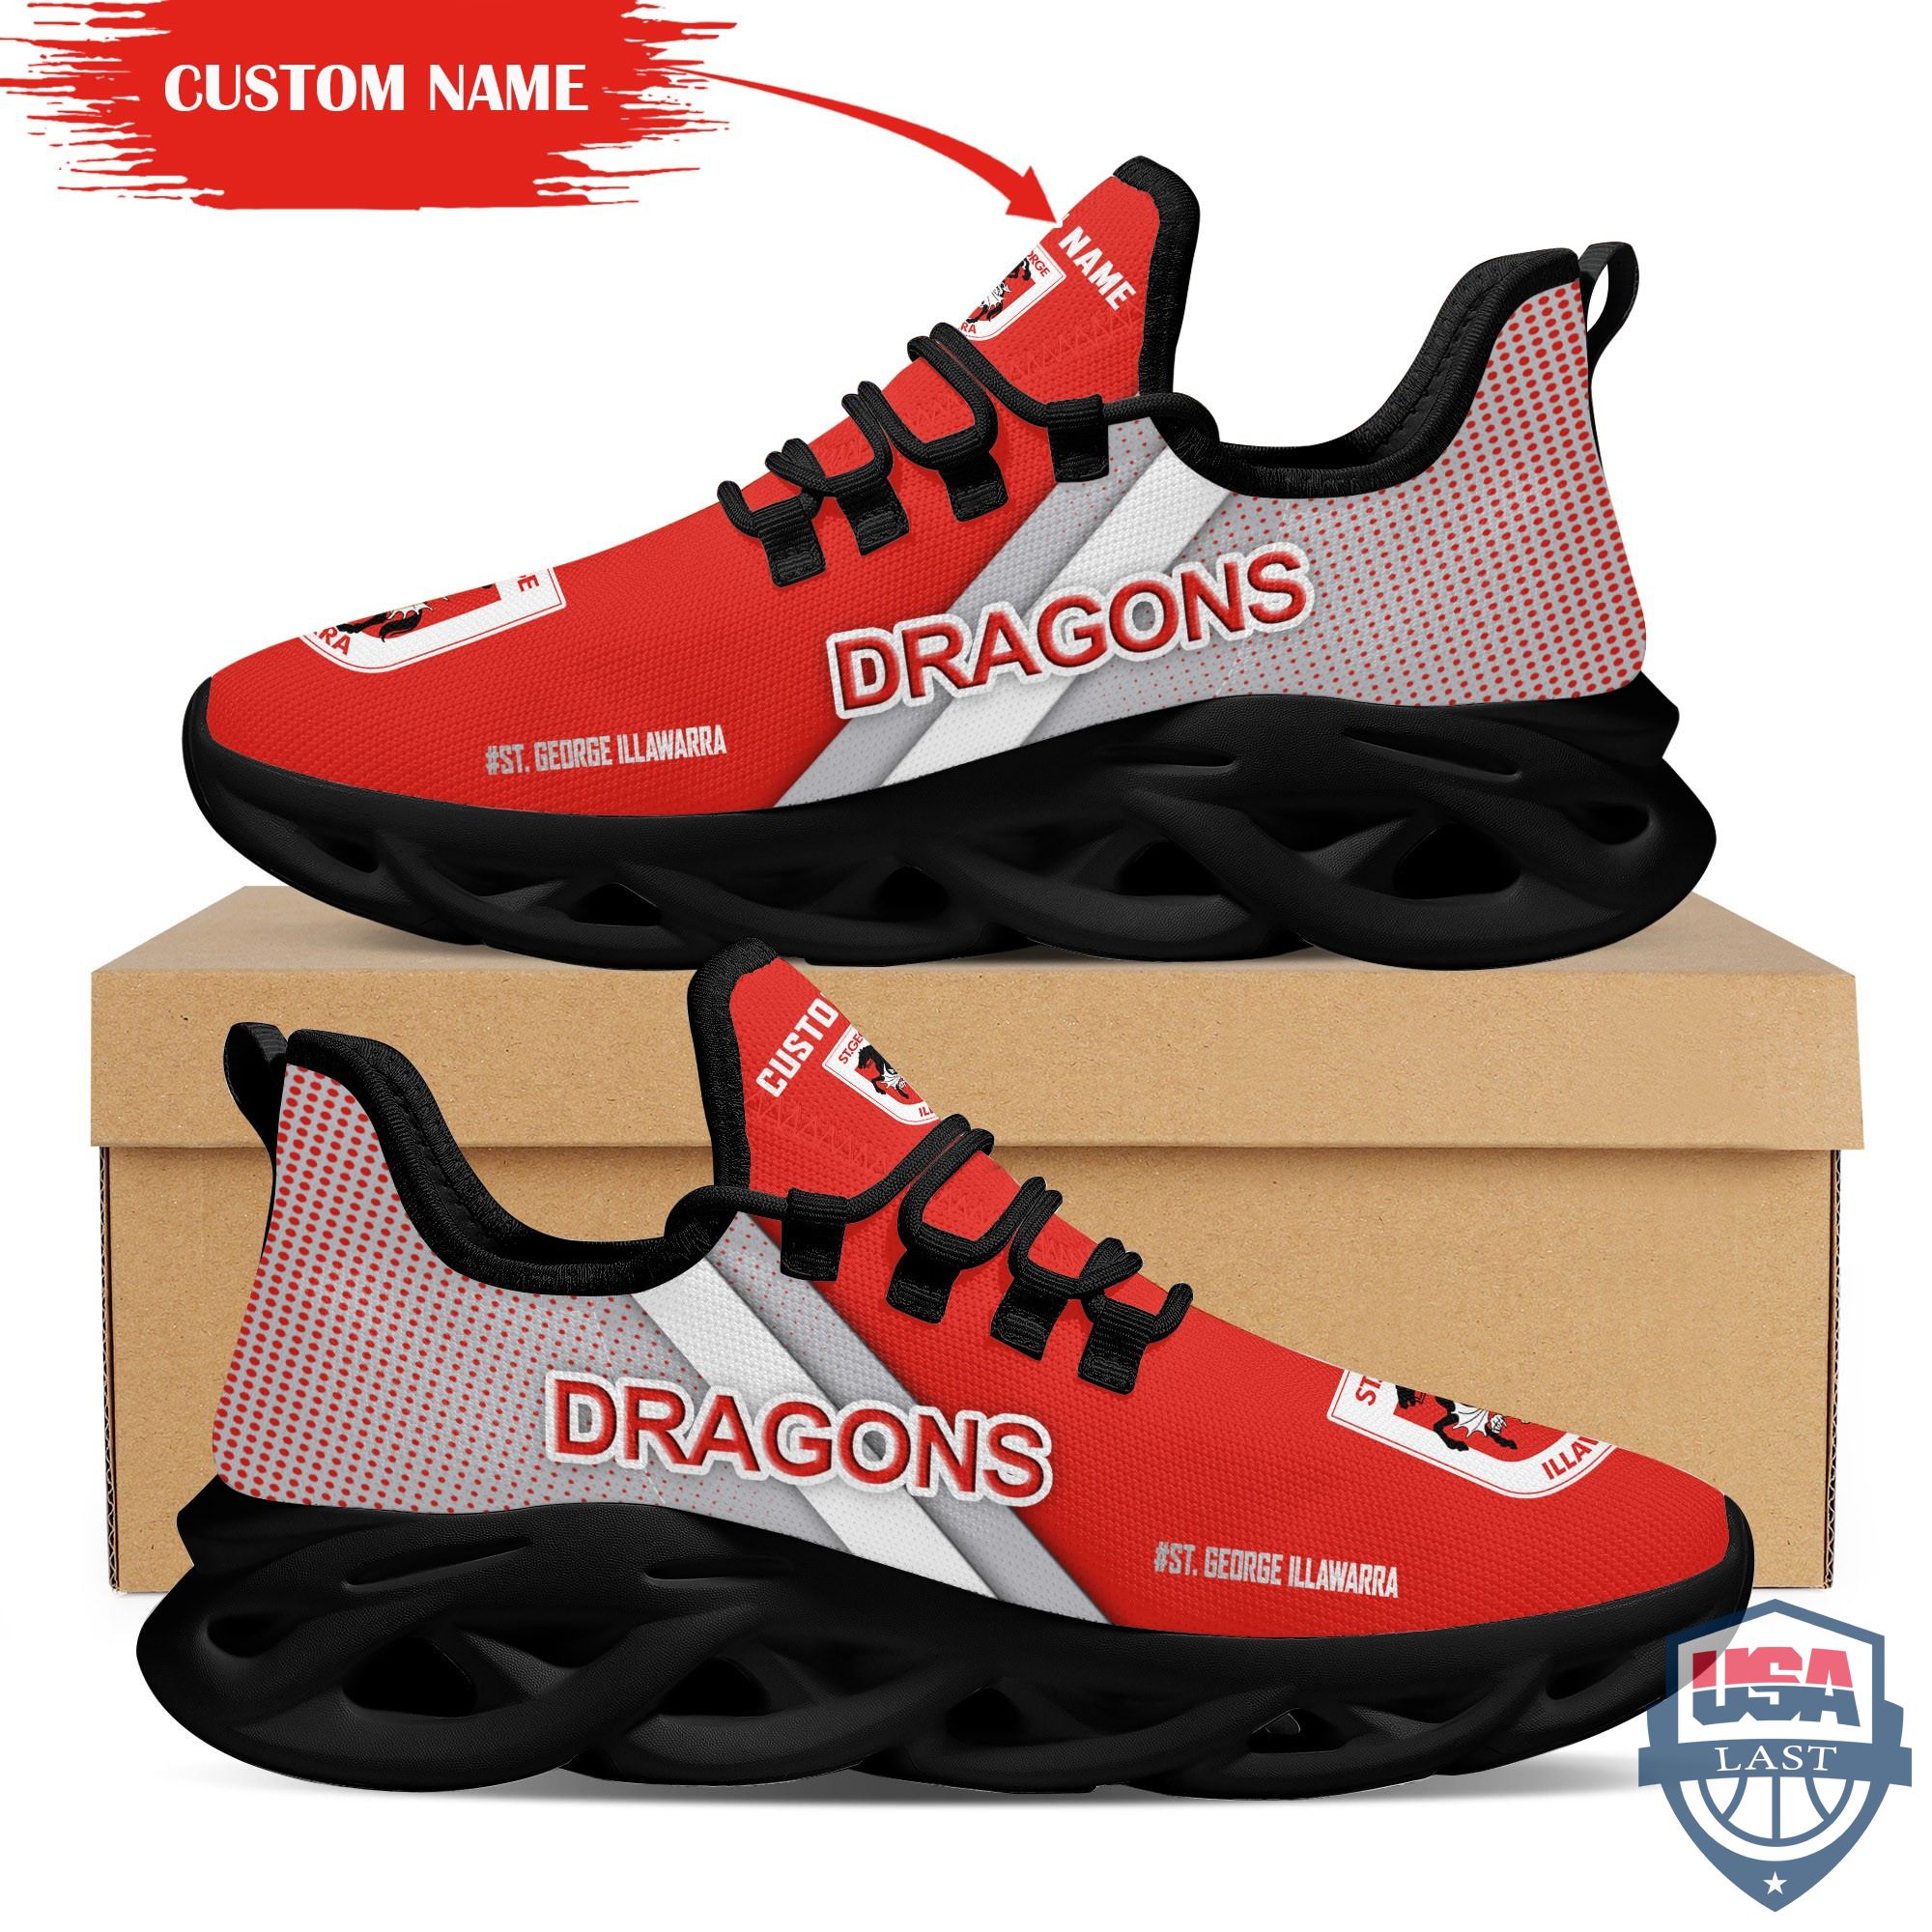 2D4YFKtE-T140122-165xxxPersonalized-St-George-Illawarra-Dragons-Max-Soul-Shoes.jpg